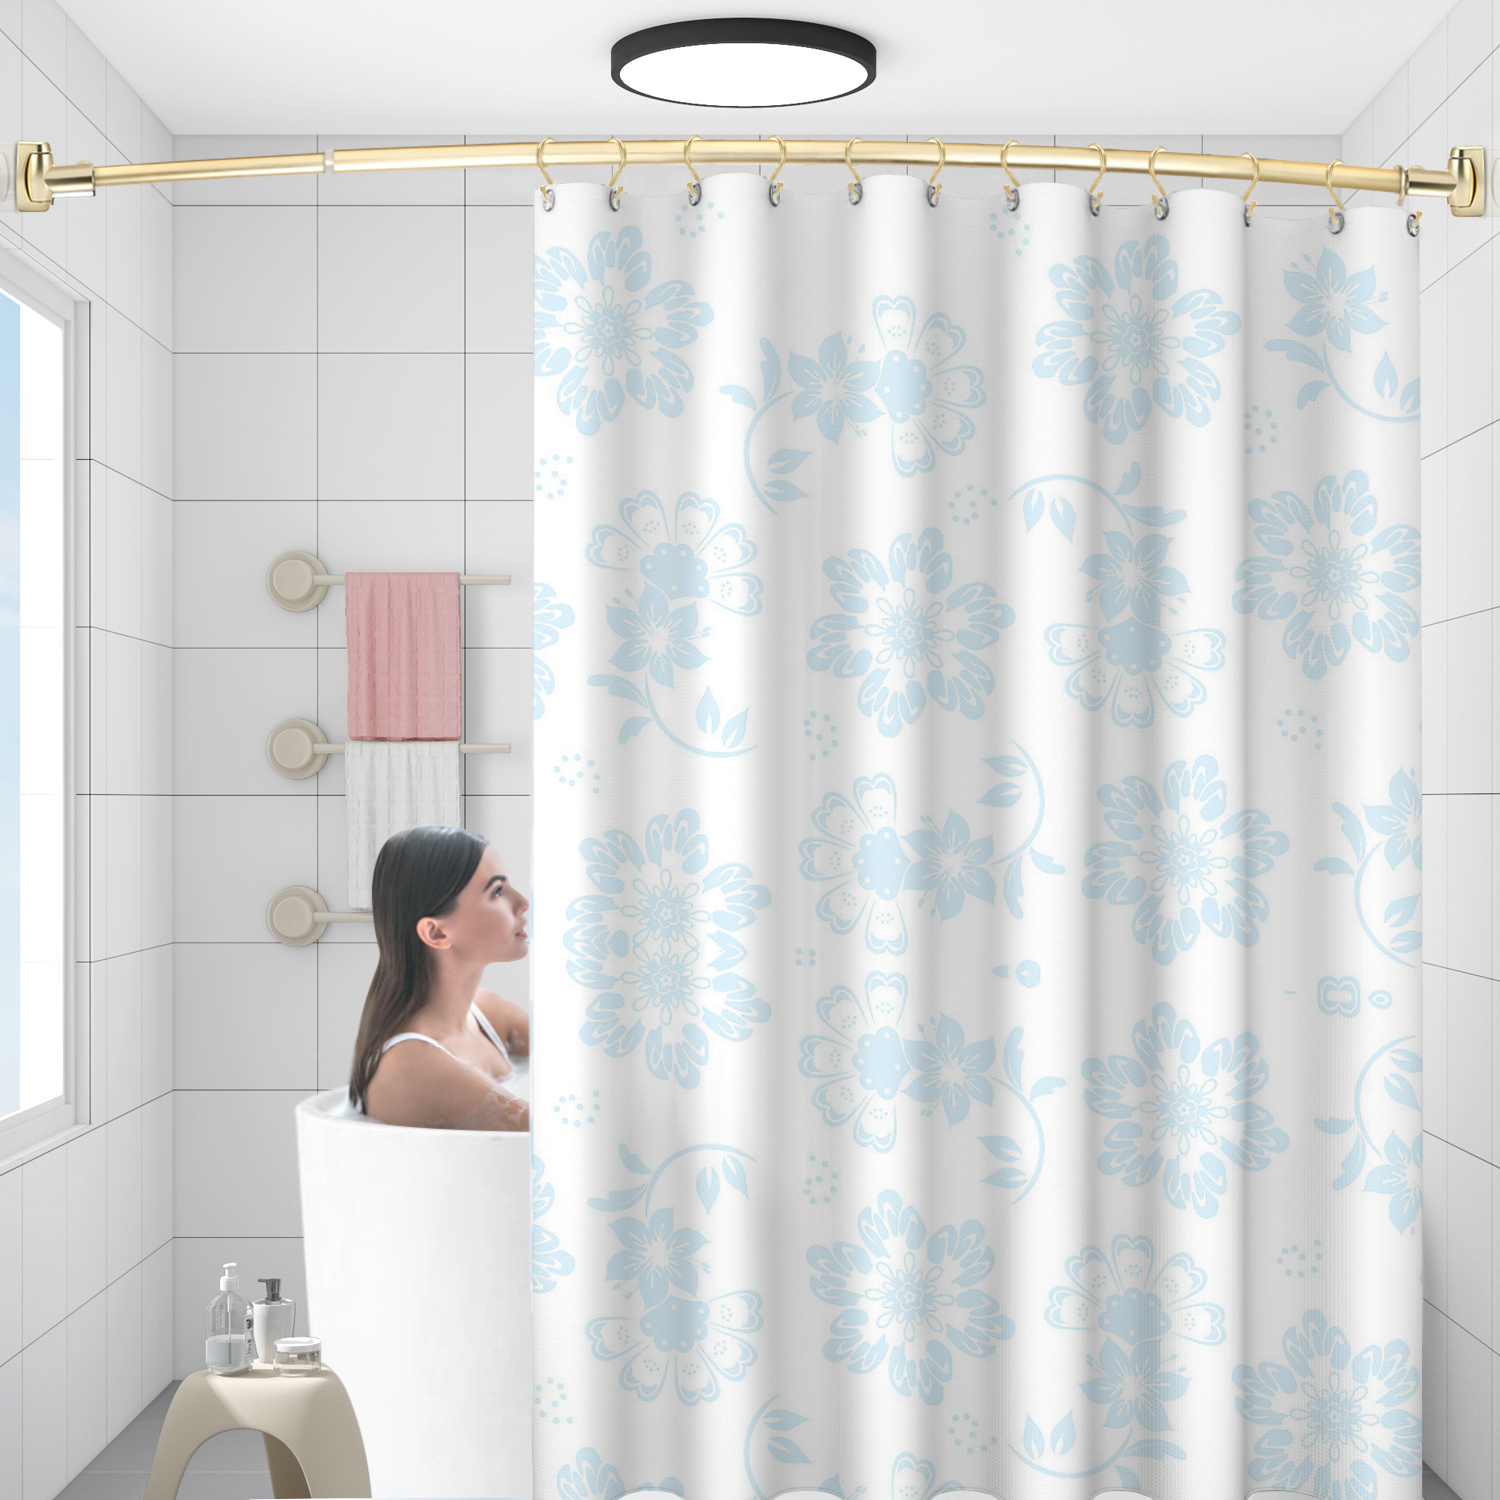 European Style Gold Stainless Steel 72" Adjustable Curved Fixed Shower Curtain Rod